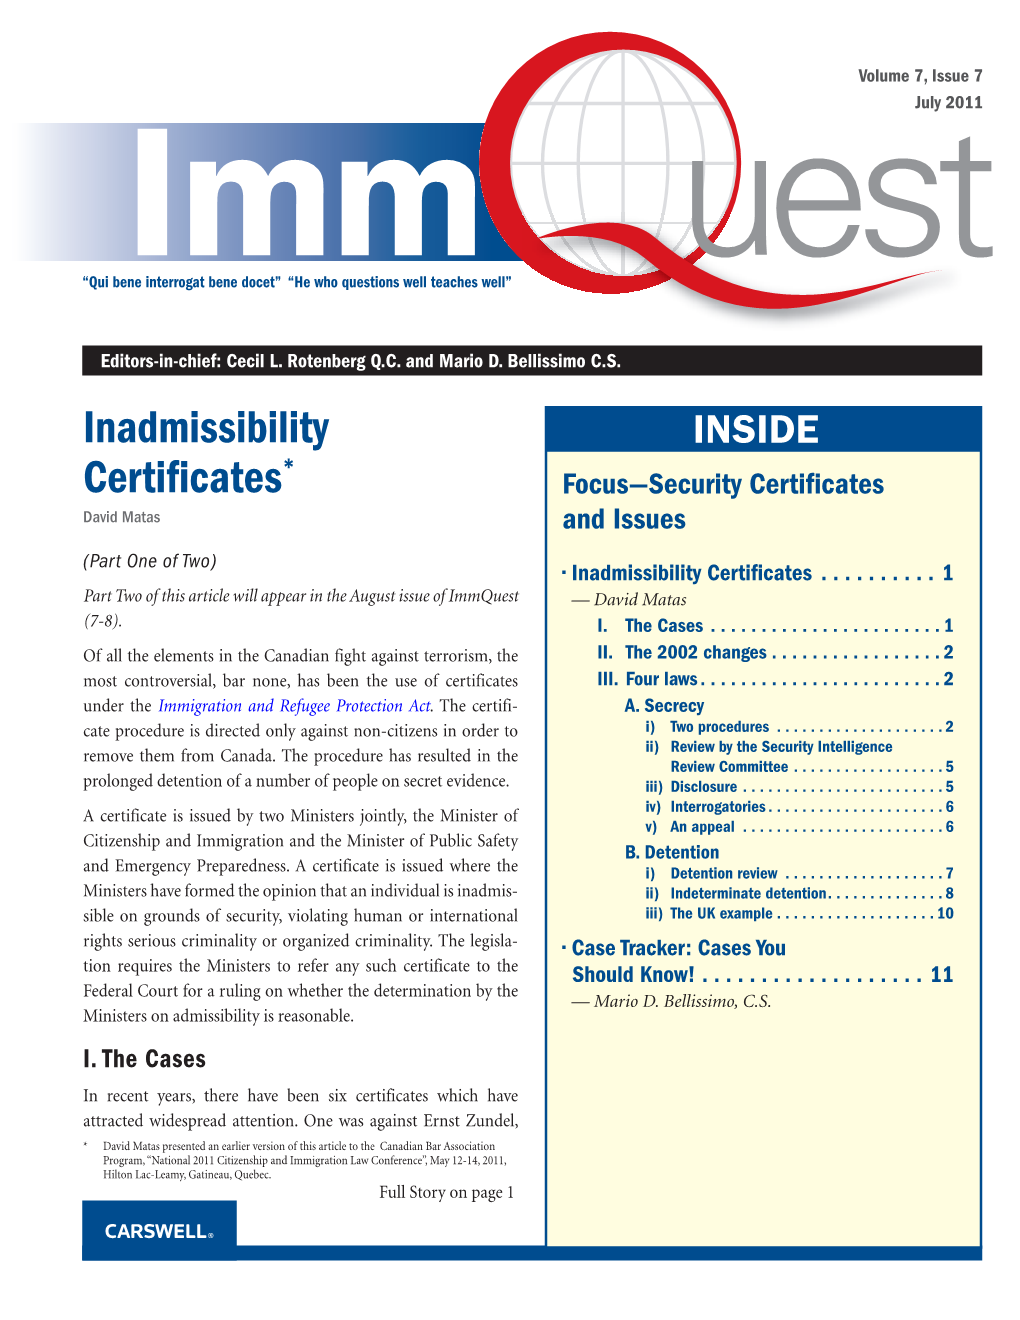 Inadmissibility Certificates*